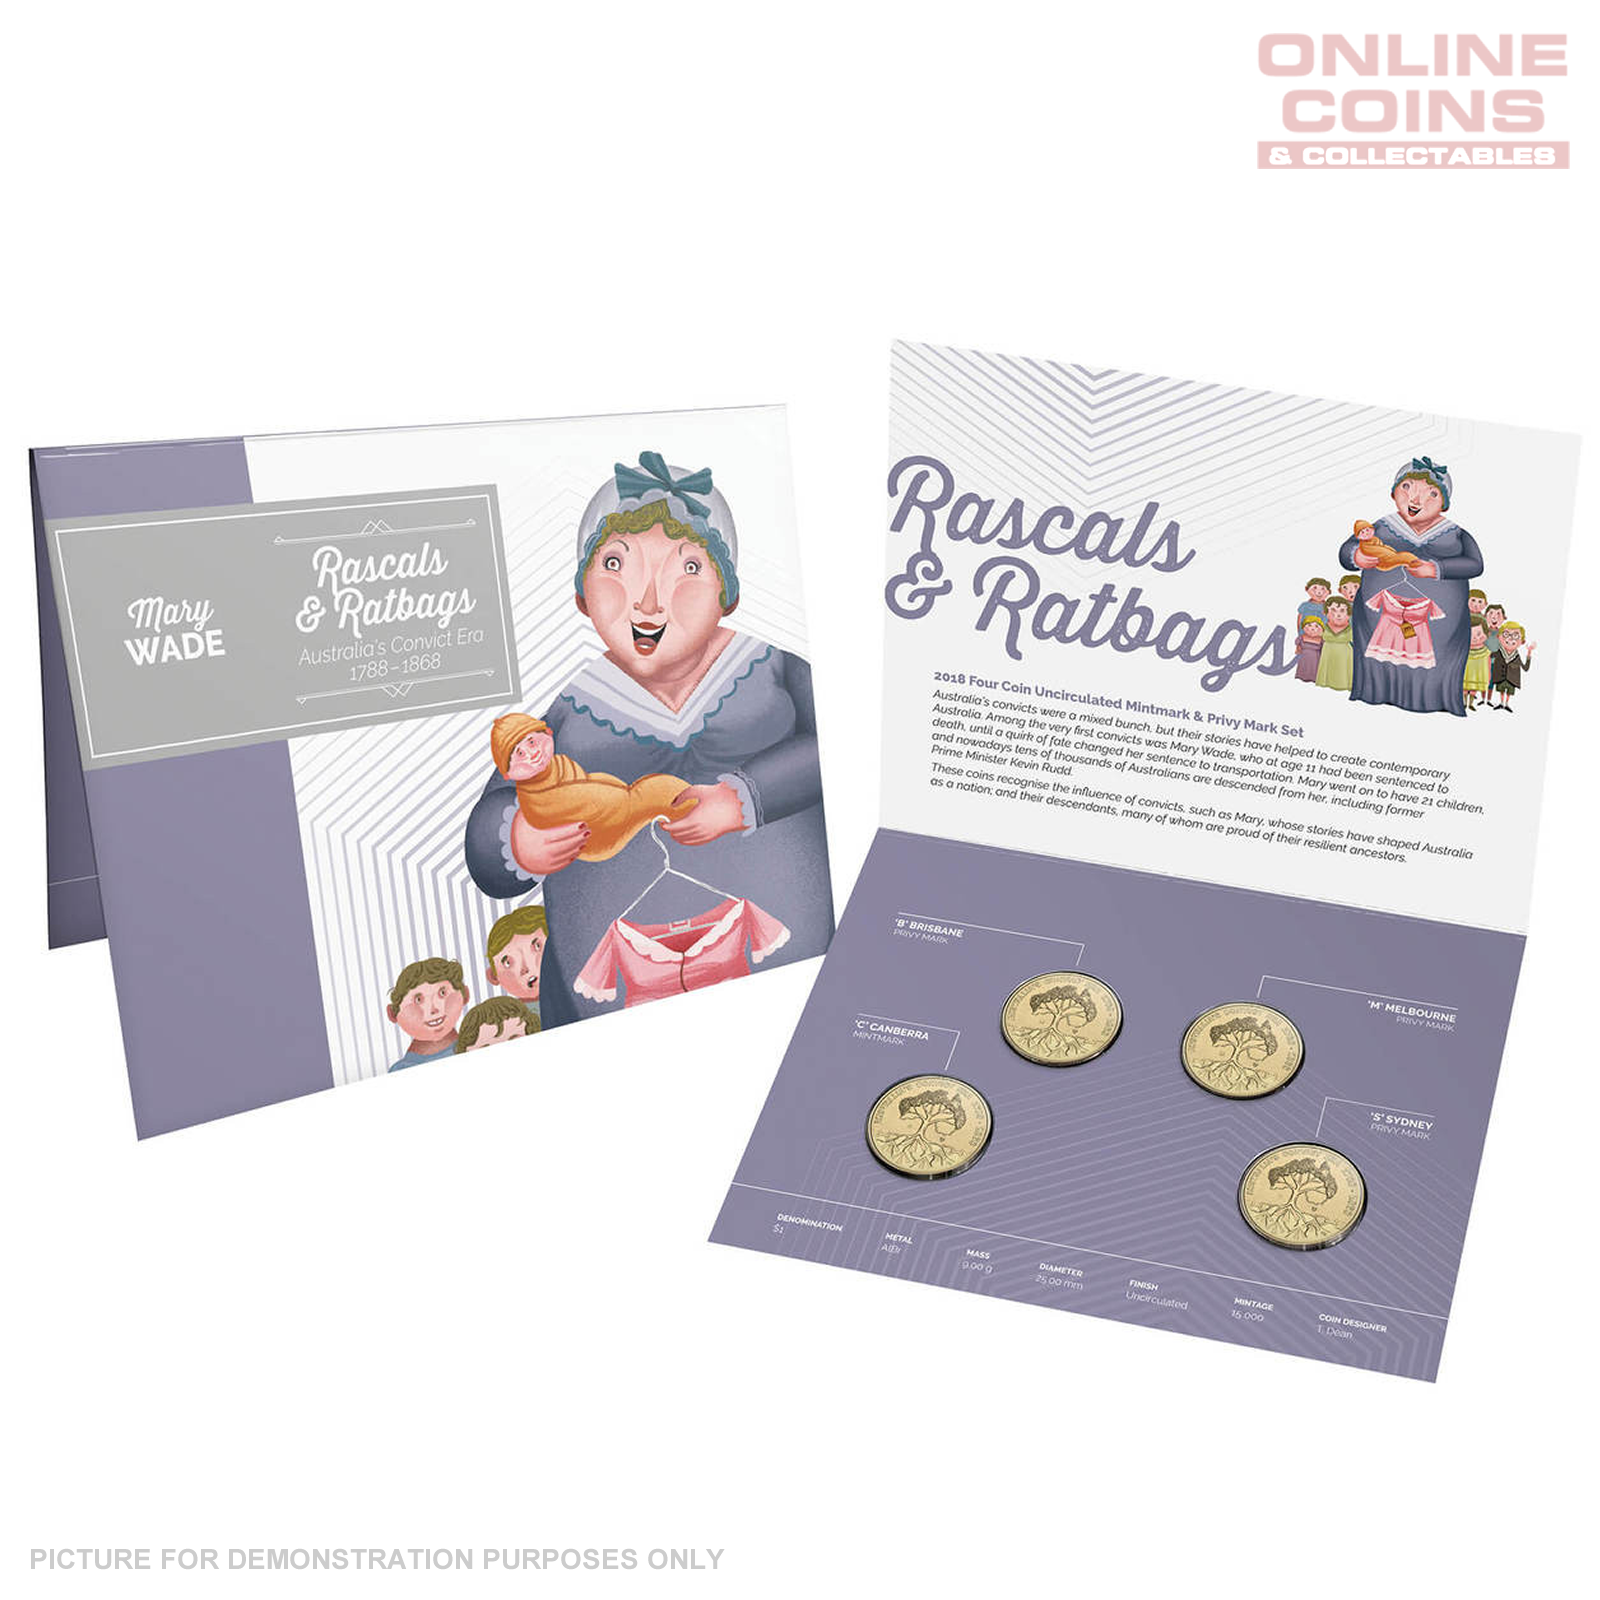 2018 $1 Uncirculated Mintmark and Privy 4 Coin Set - Rascals and Ratbags